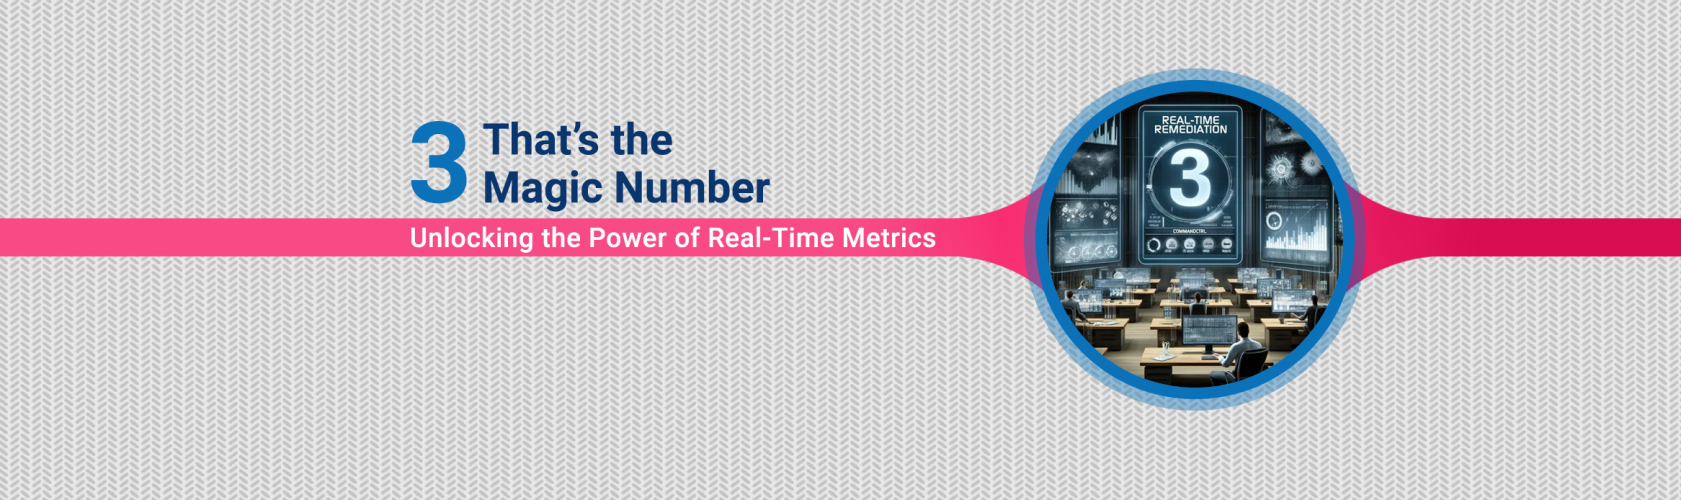 3 That’s the Magic Number: Unlocking the Power of Real-Time Metrics with CommandCTRL